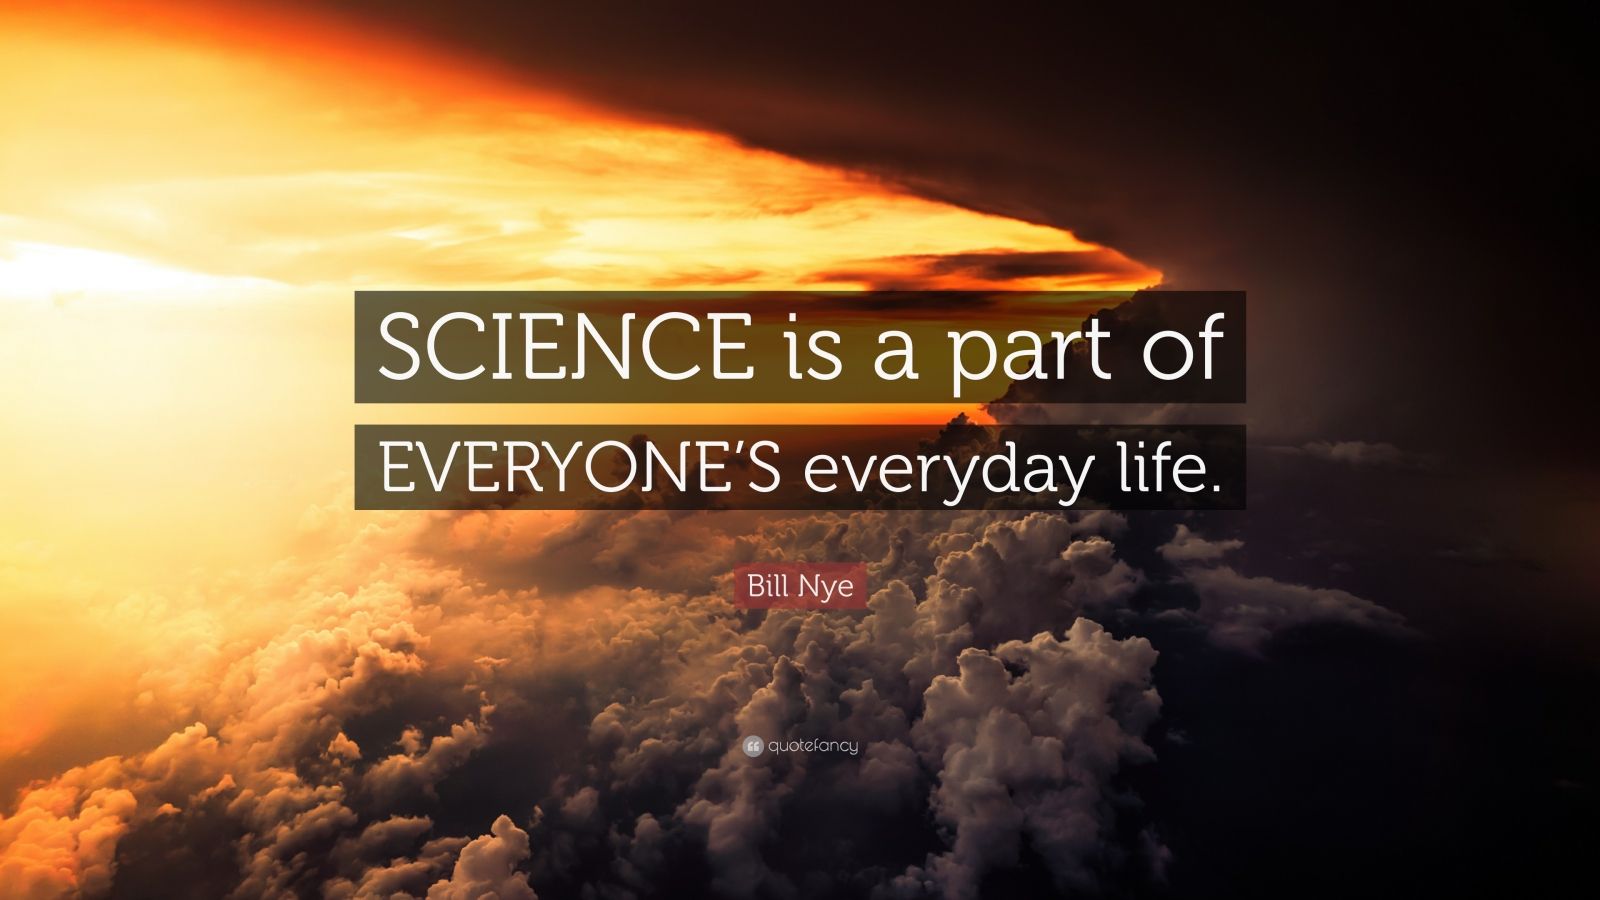 science in everyday life essay quotes